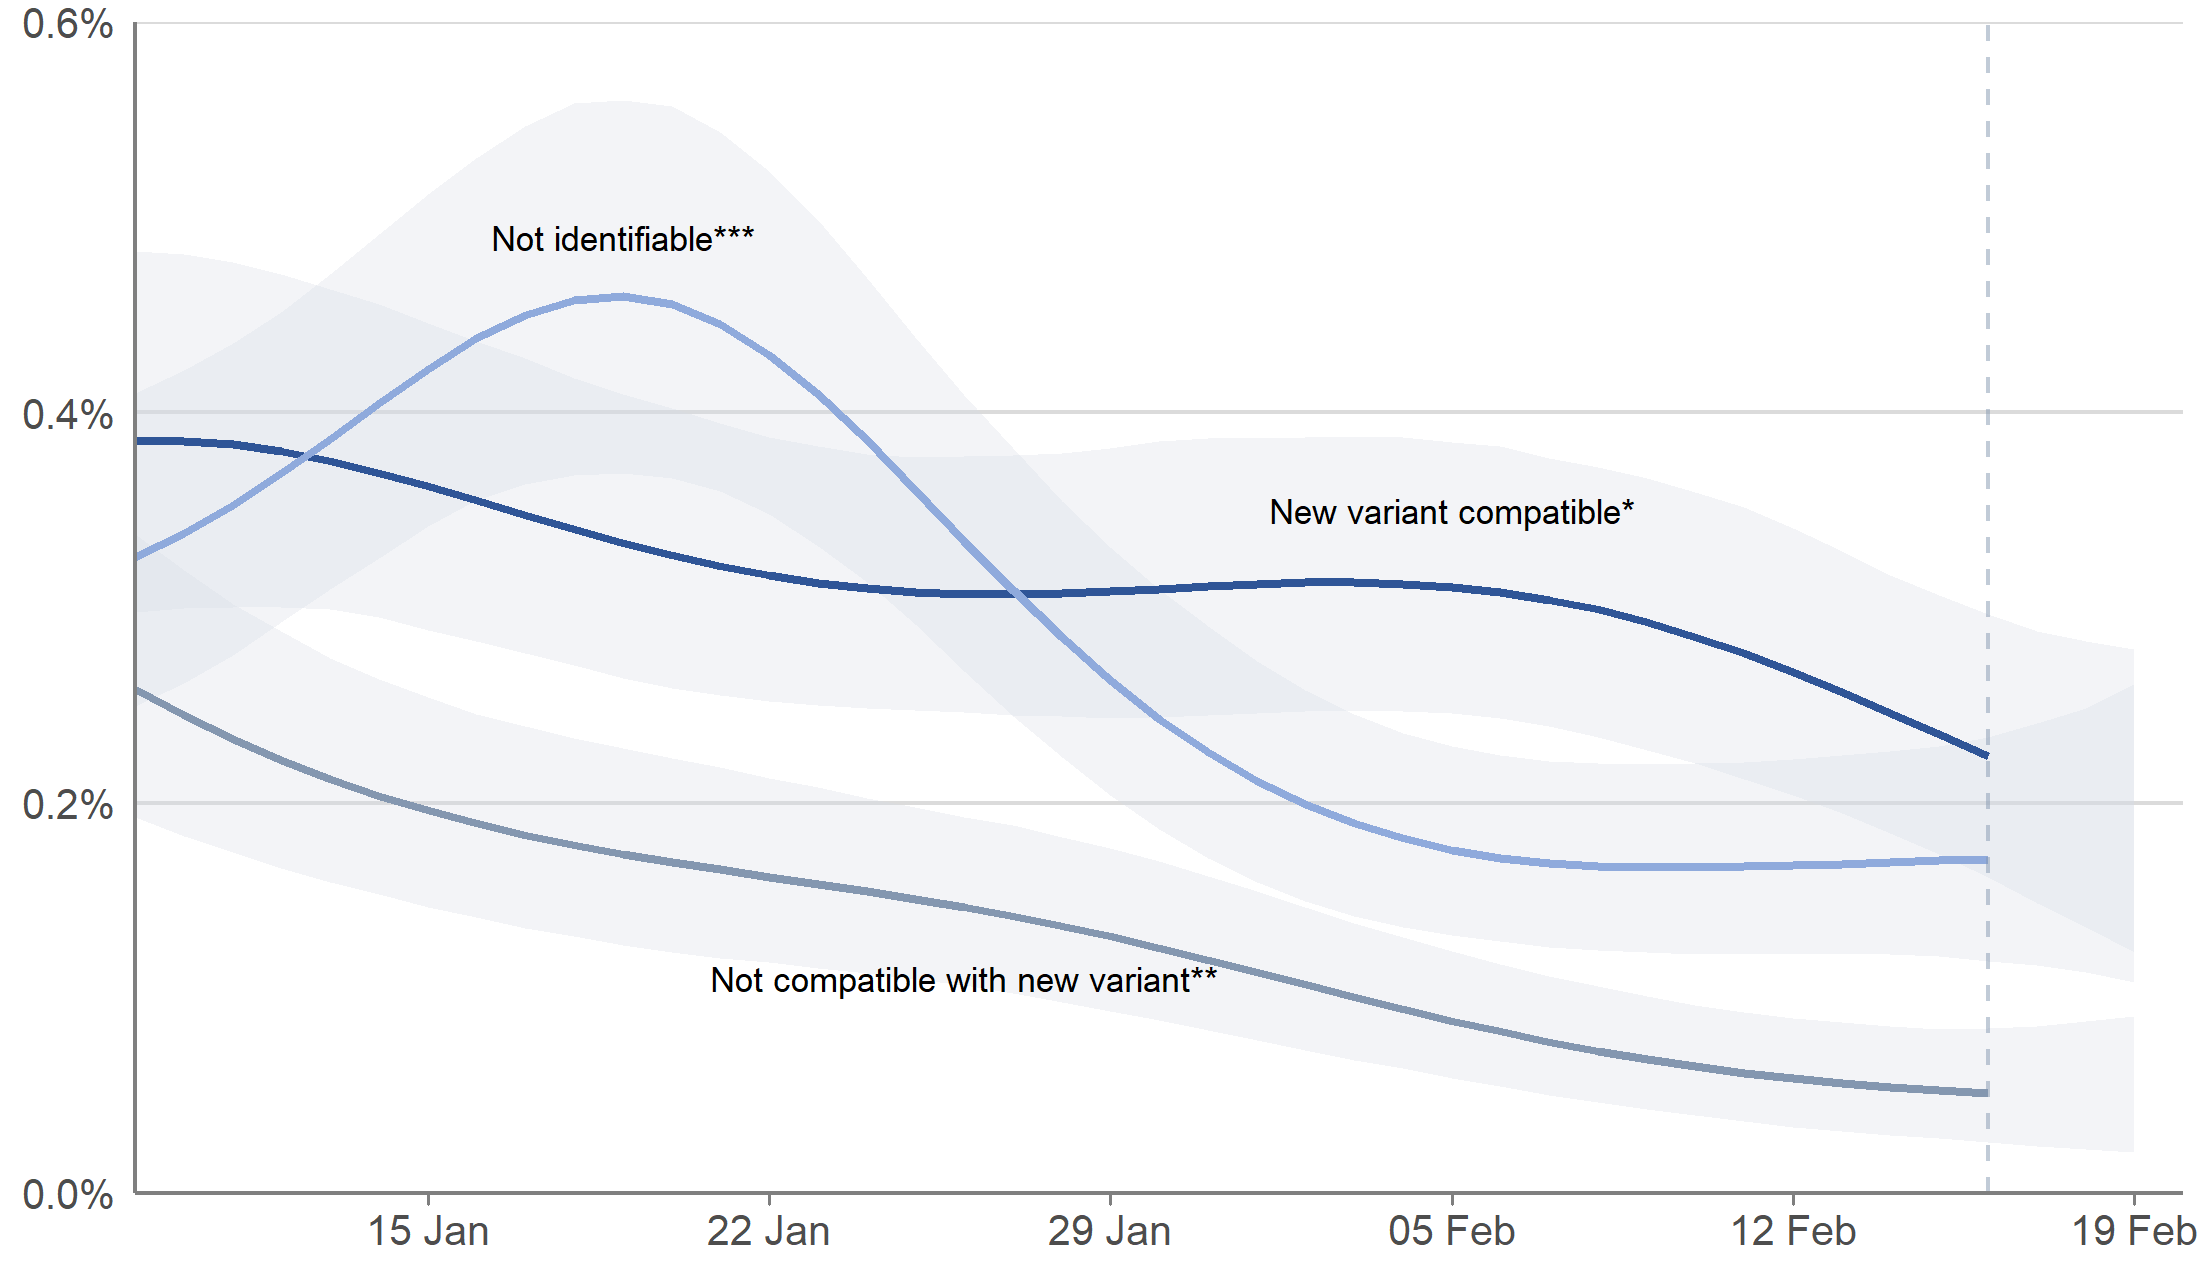 Figure 3: Estimated percentage of the population in Scotland testing positive that are compatible with the new UK variant, not compatible with the new UK variant and other ‘not identifiable’ cases, between 9 January and 19 February 2021 including 95% credible intervals (see notes 1,3,5,6,8)